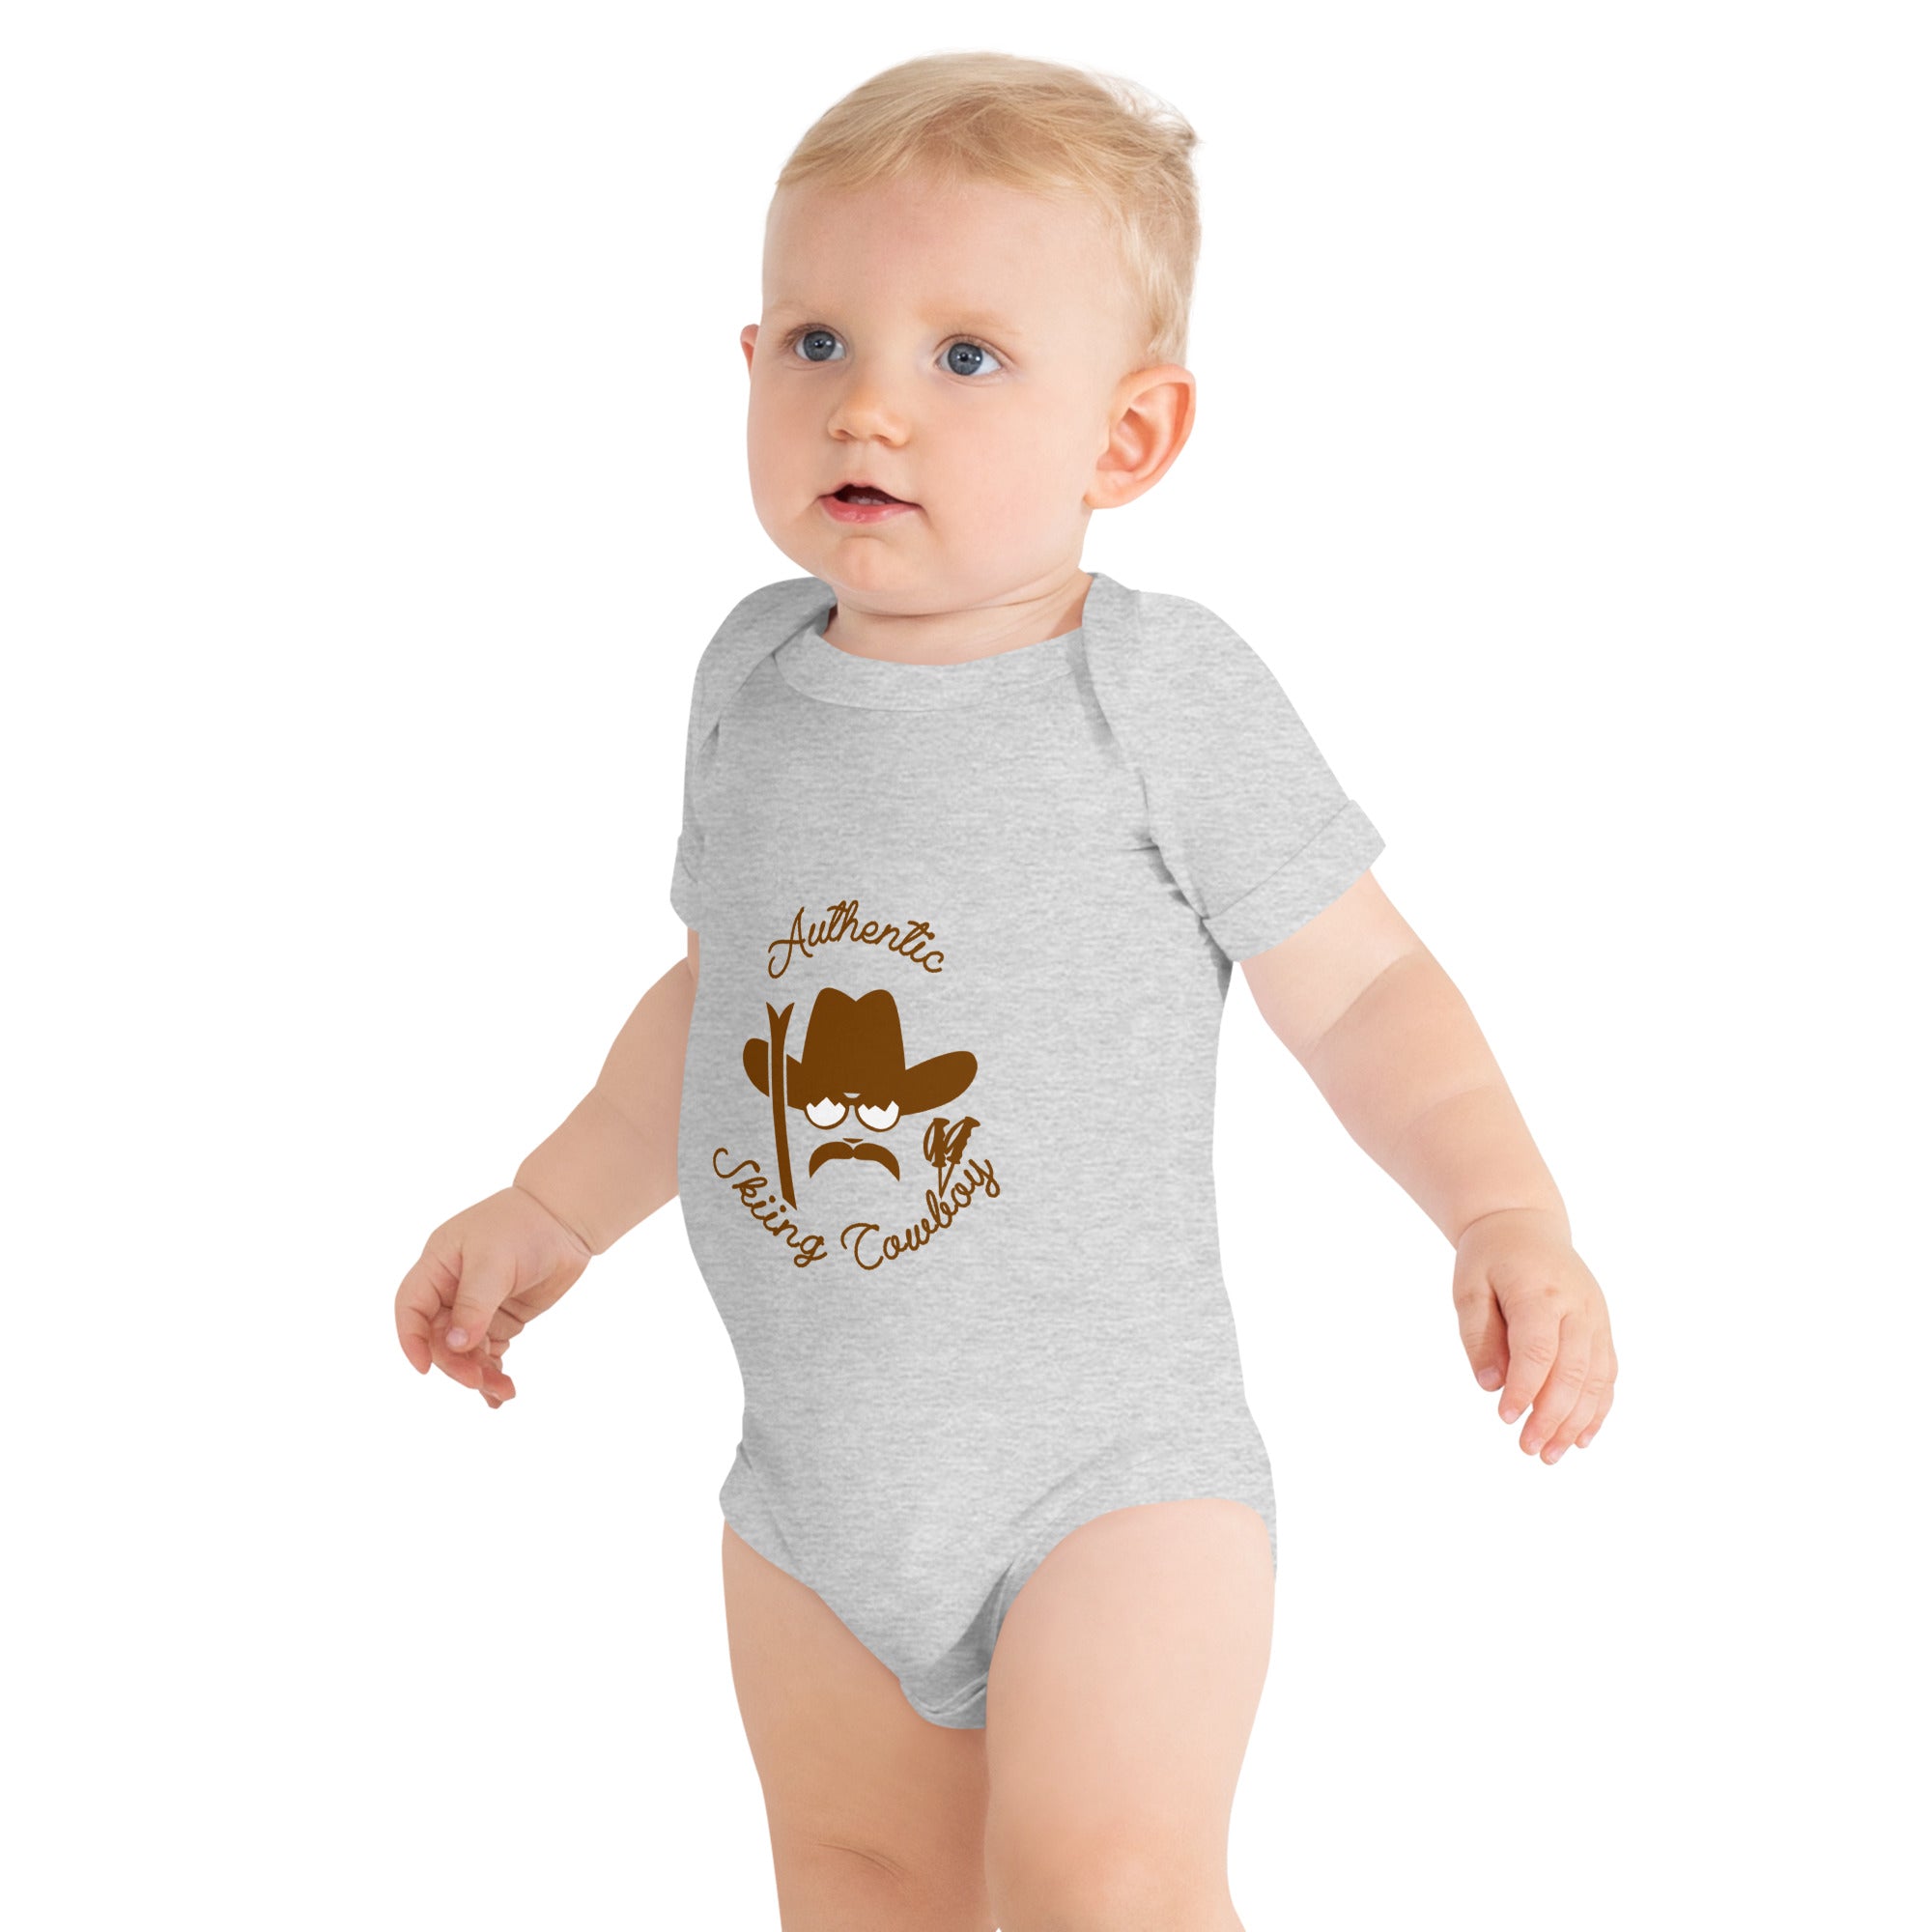 Baby short sleeve one piece Authentic Skiing Cowboy